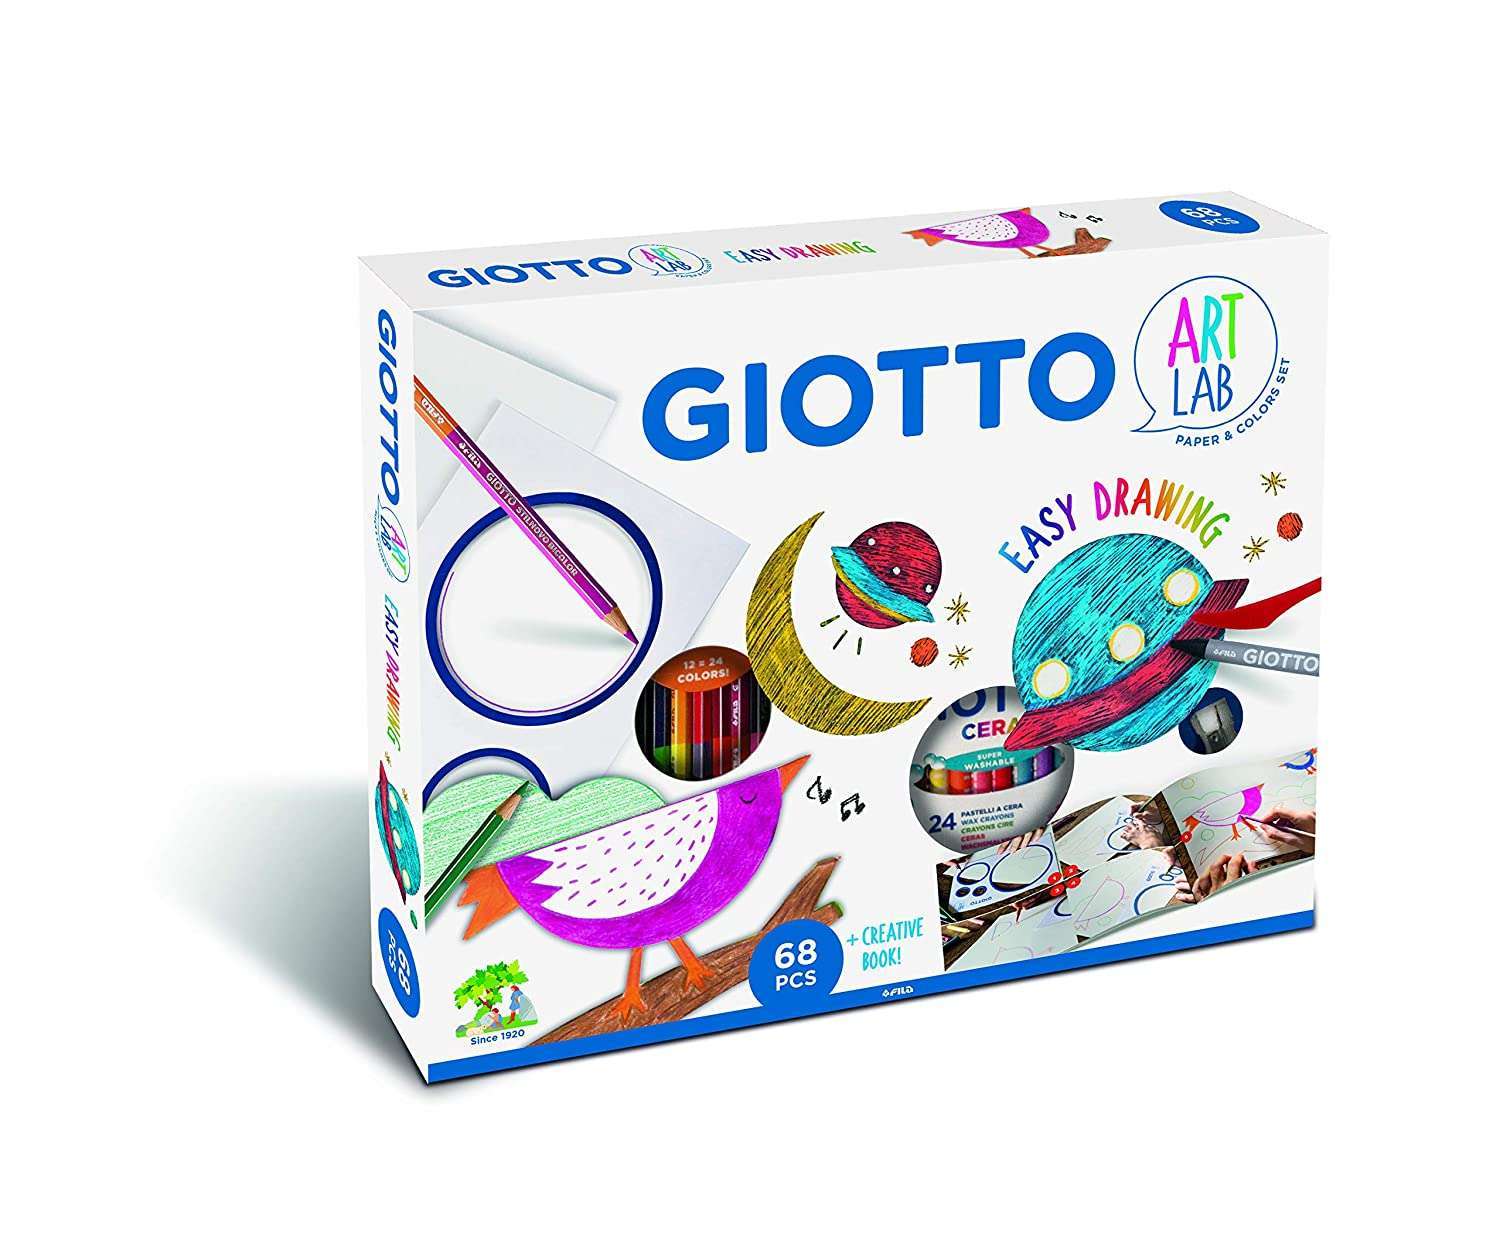 Kit Giotto 5814-00 Art Lab easy Drawing